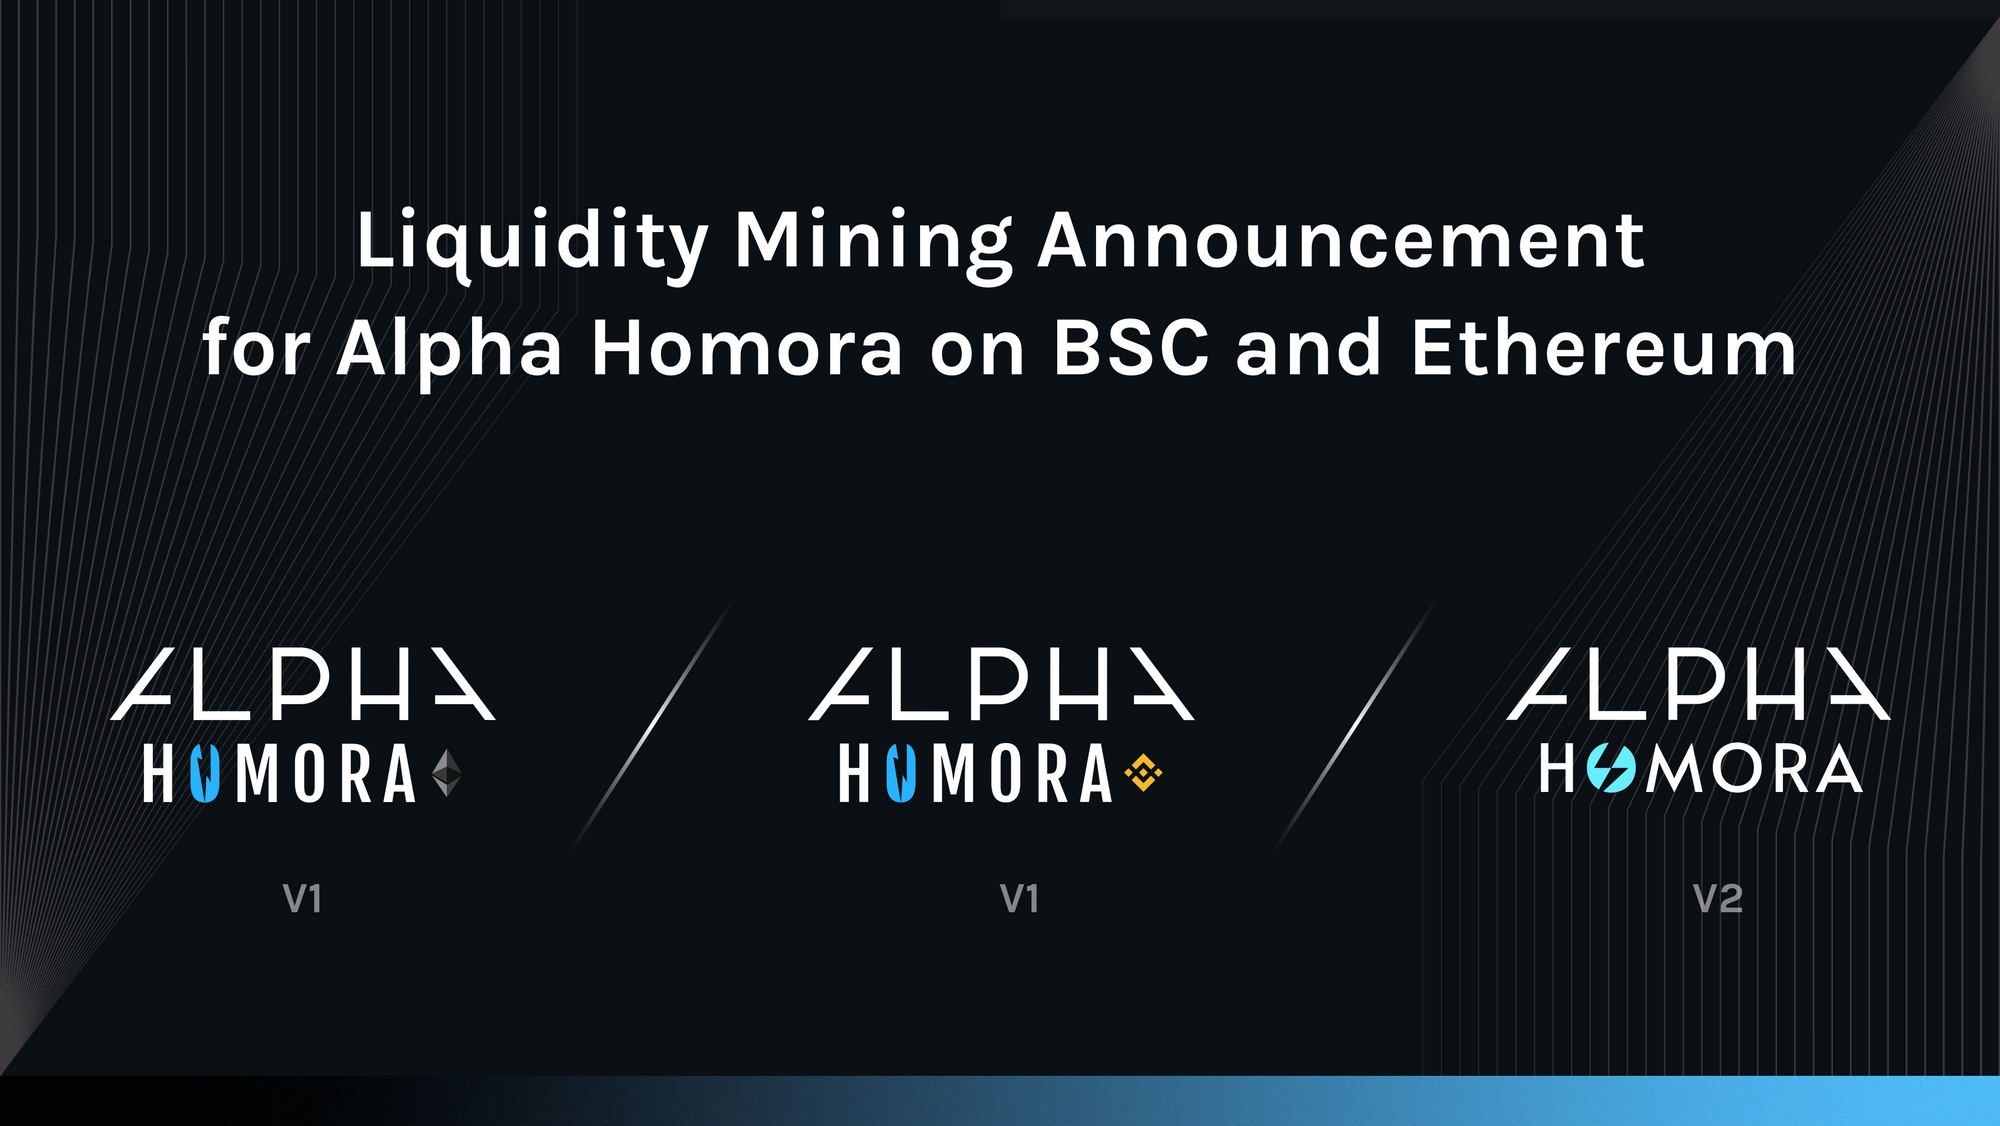 Liquidity Mining Announcement for Alpha Homora on BSC and Ethereum